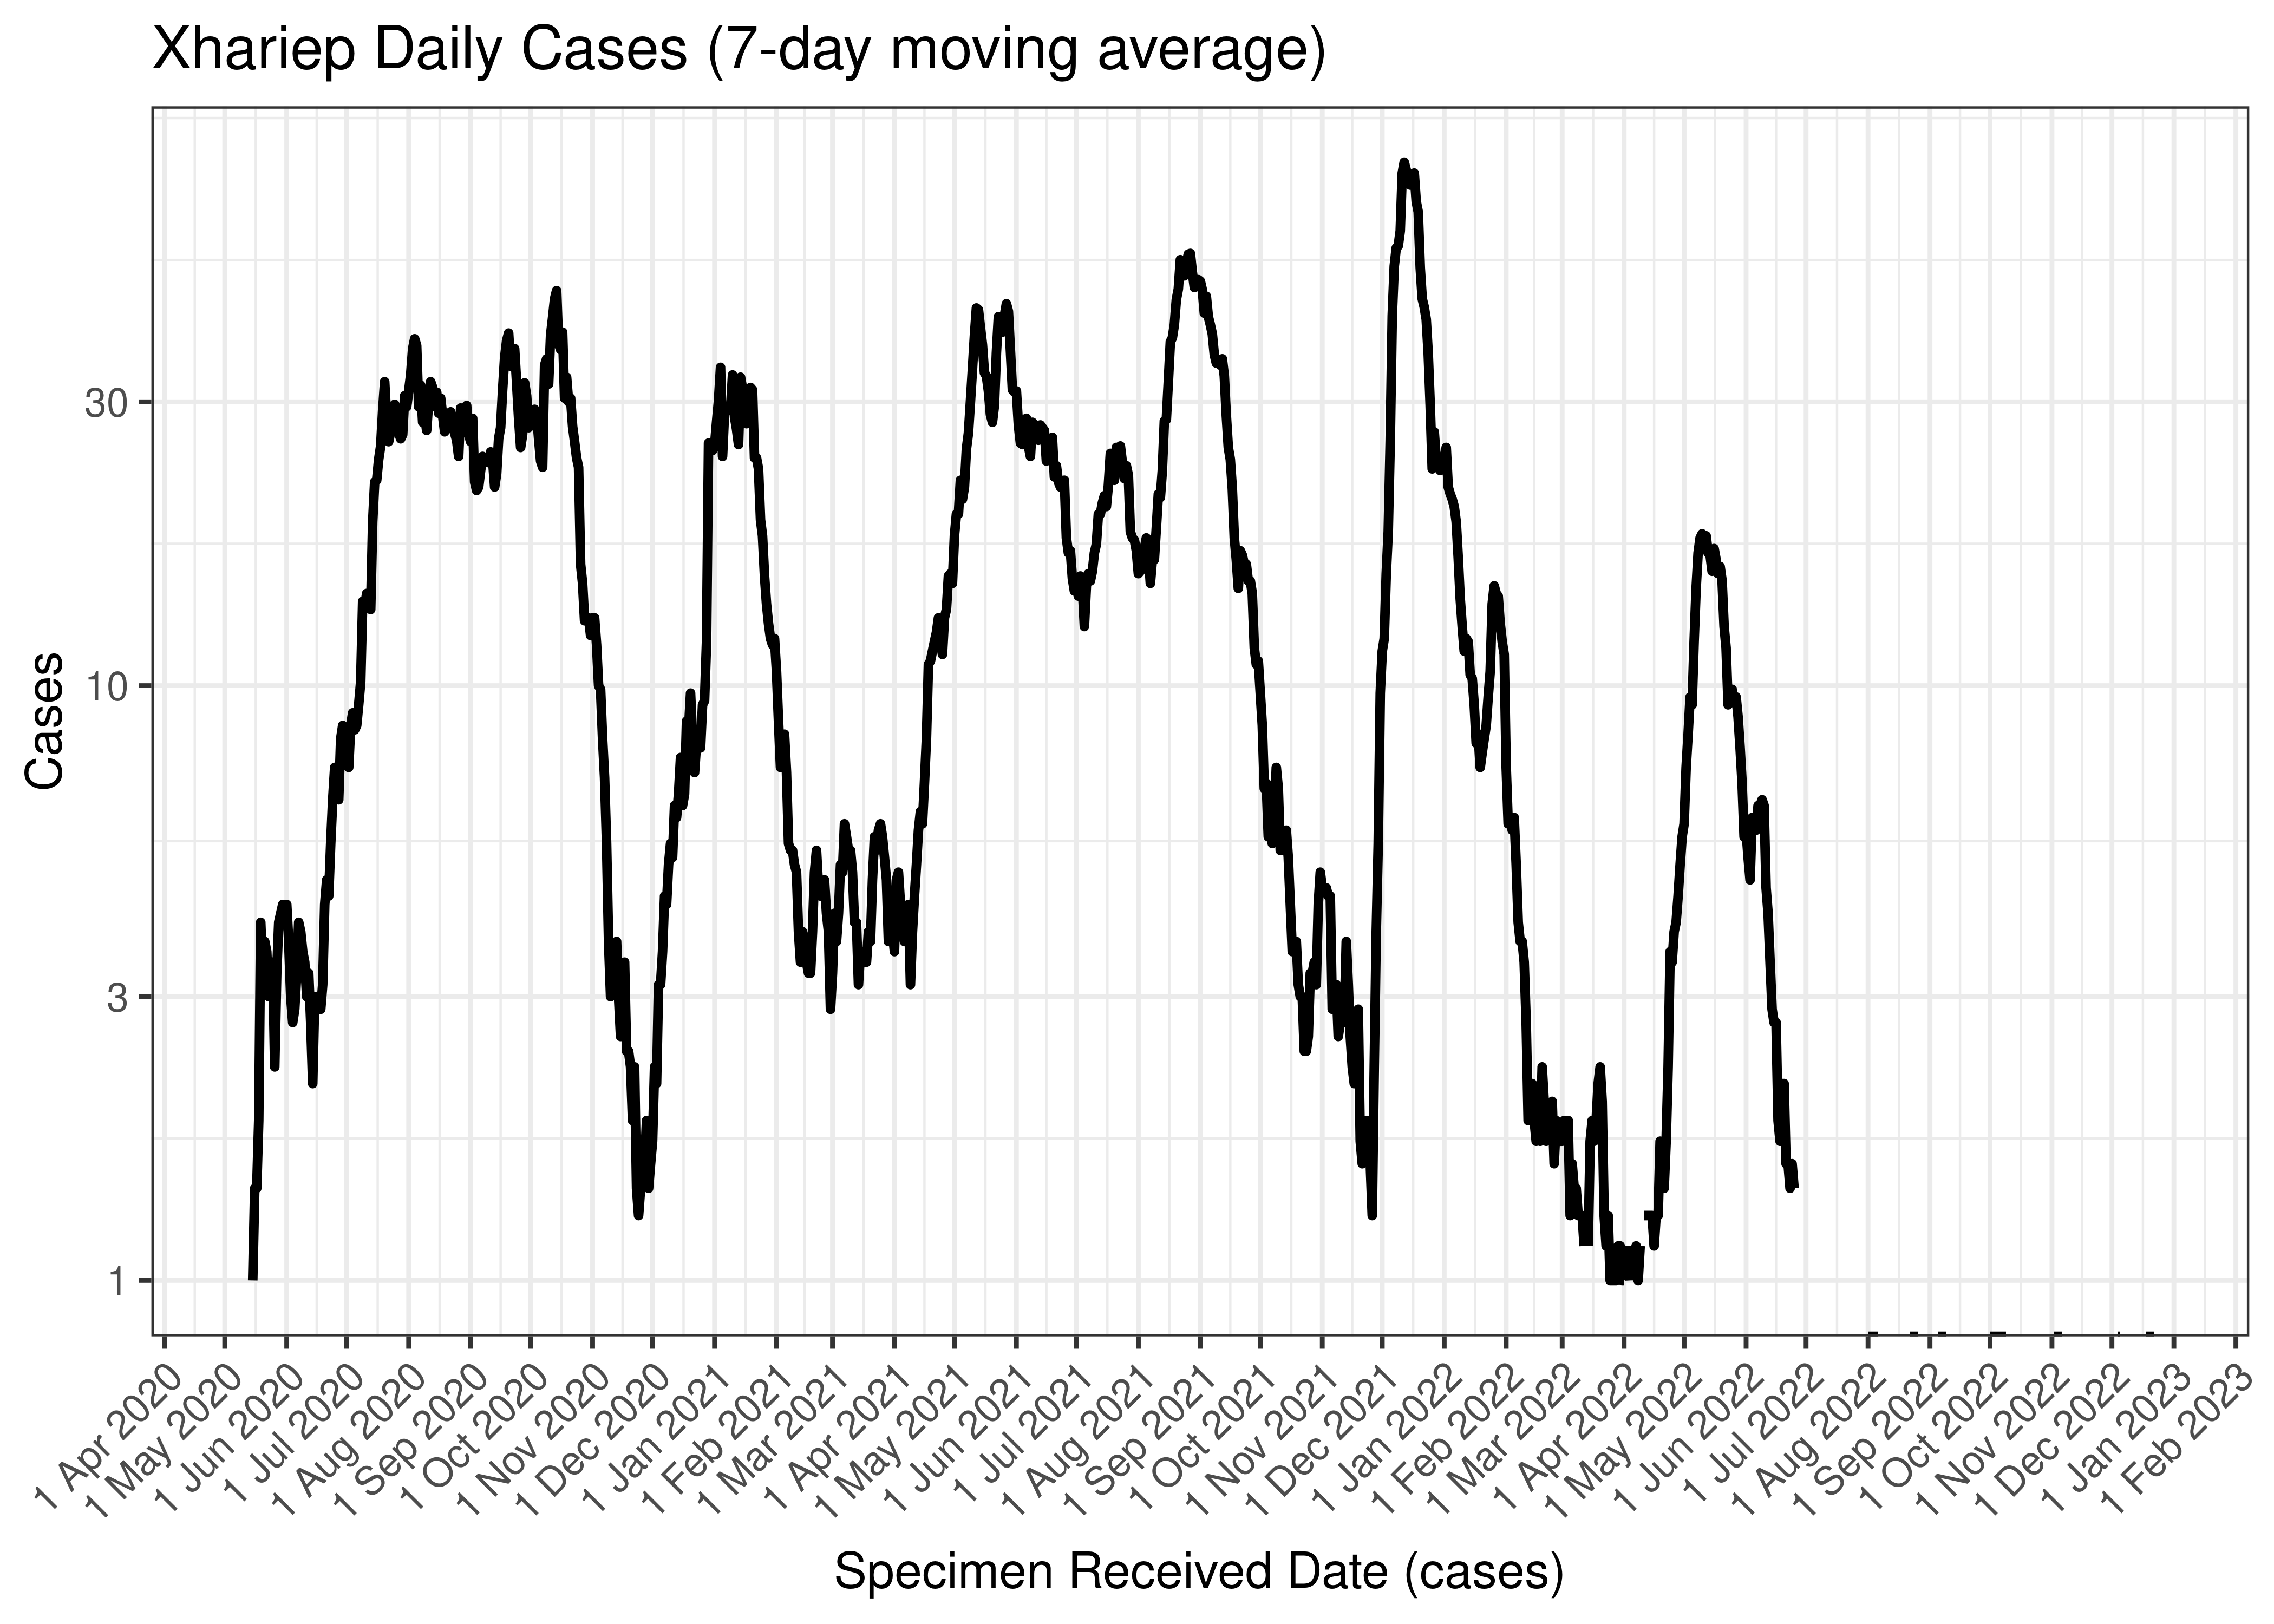 Xhariep Daily Cases (7-day moving average)